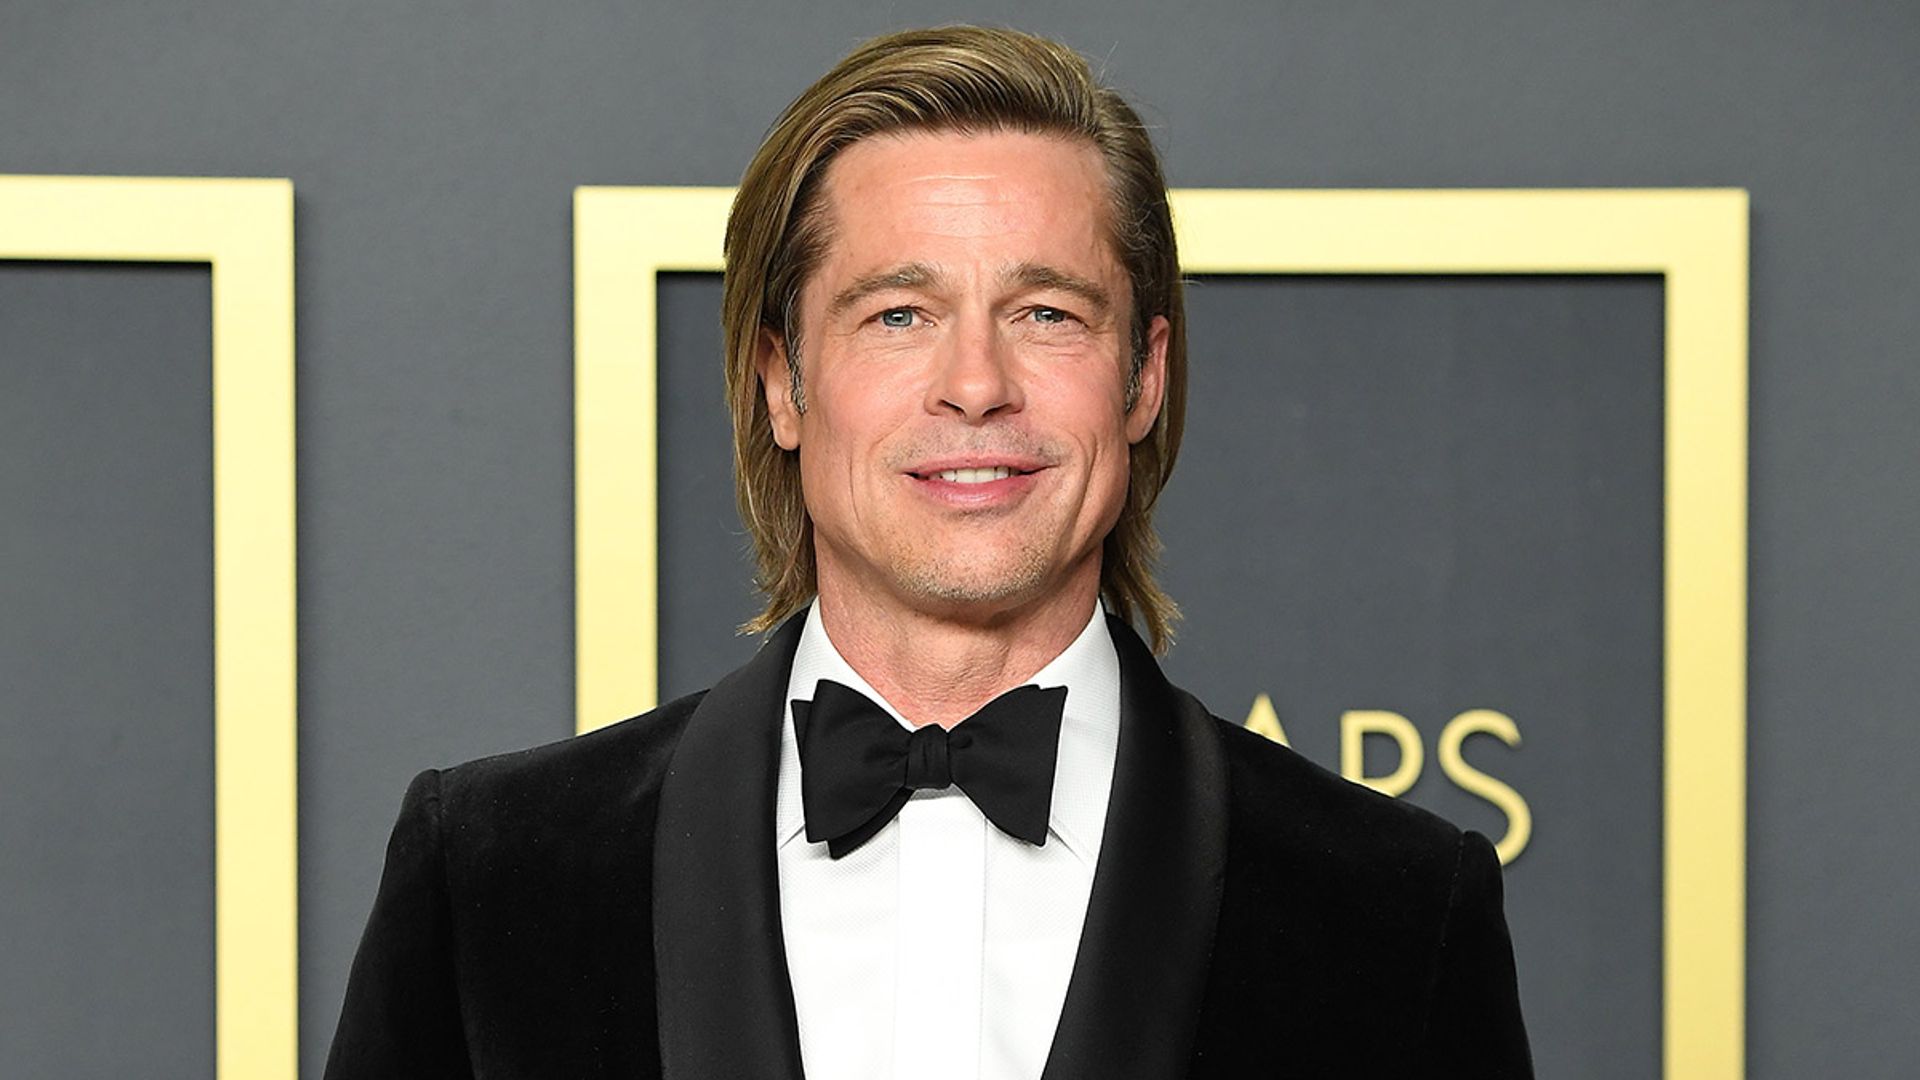 Brad Pitt shows his generous side on new home renovation series